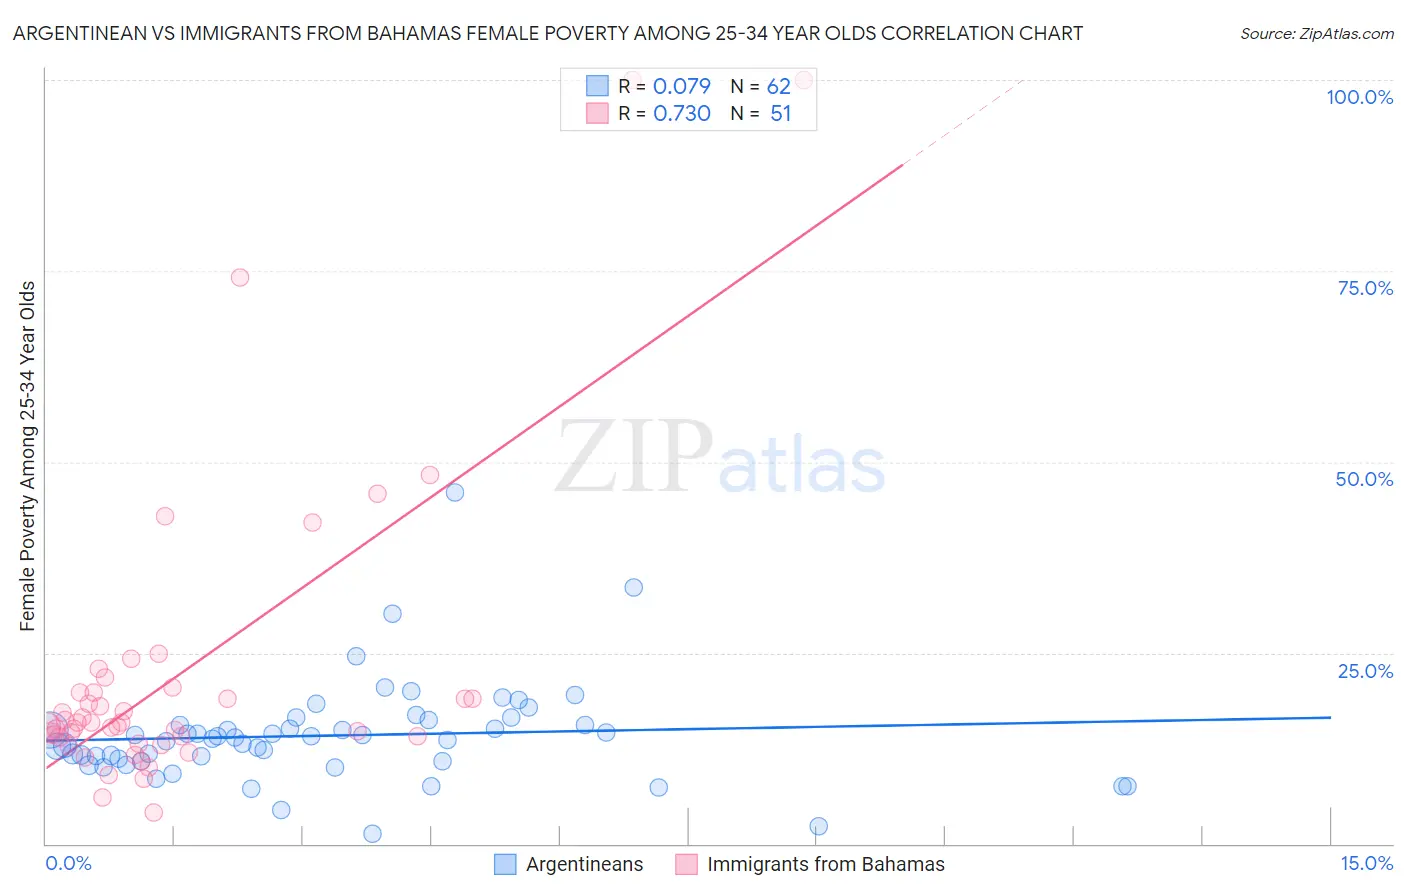 Argentinean vs Immigrants from Bahamas Female Poverty Among 25-34 Year Olds